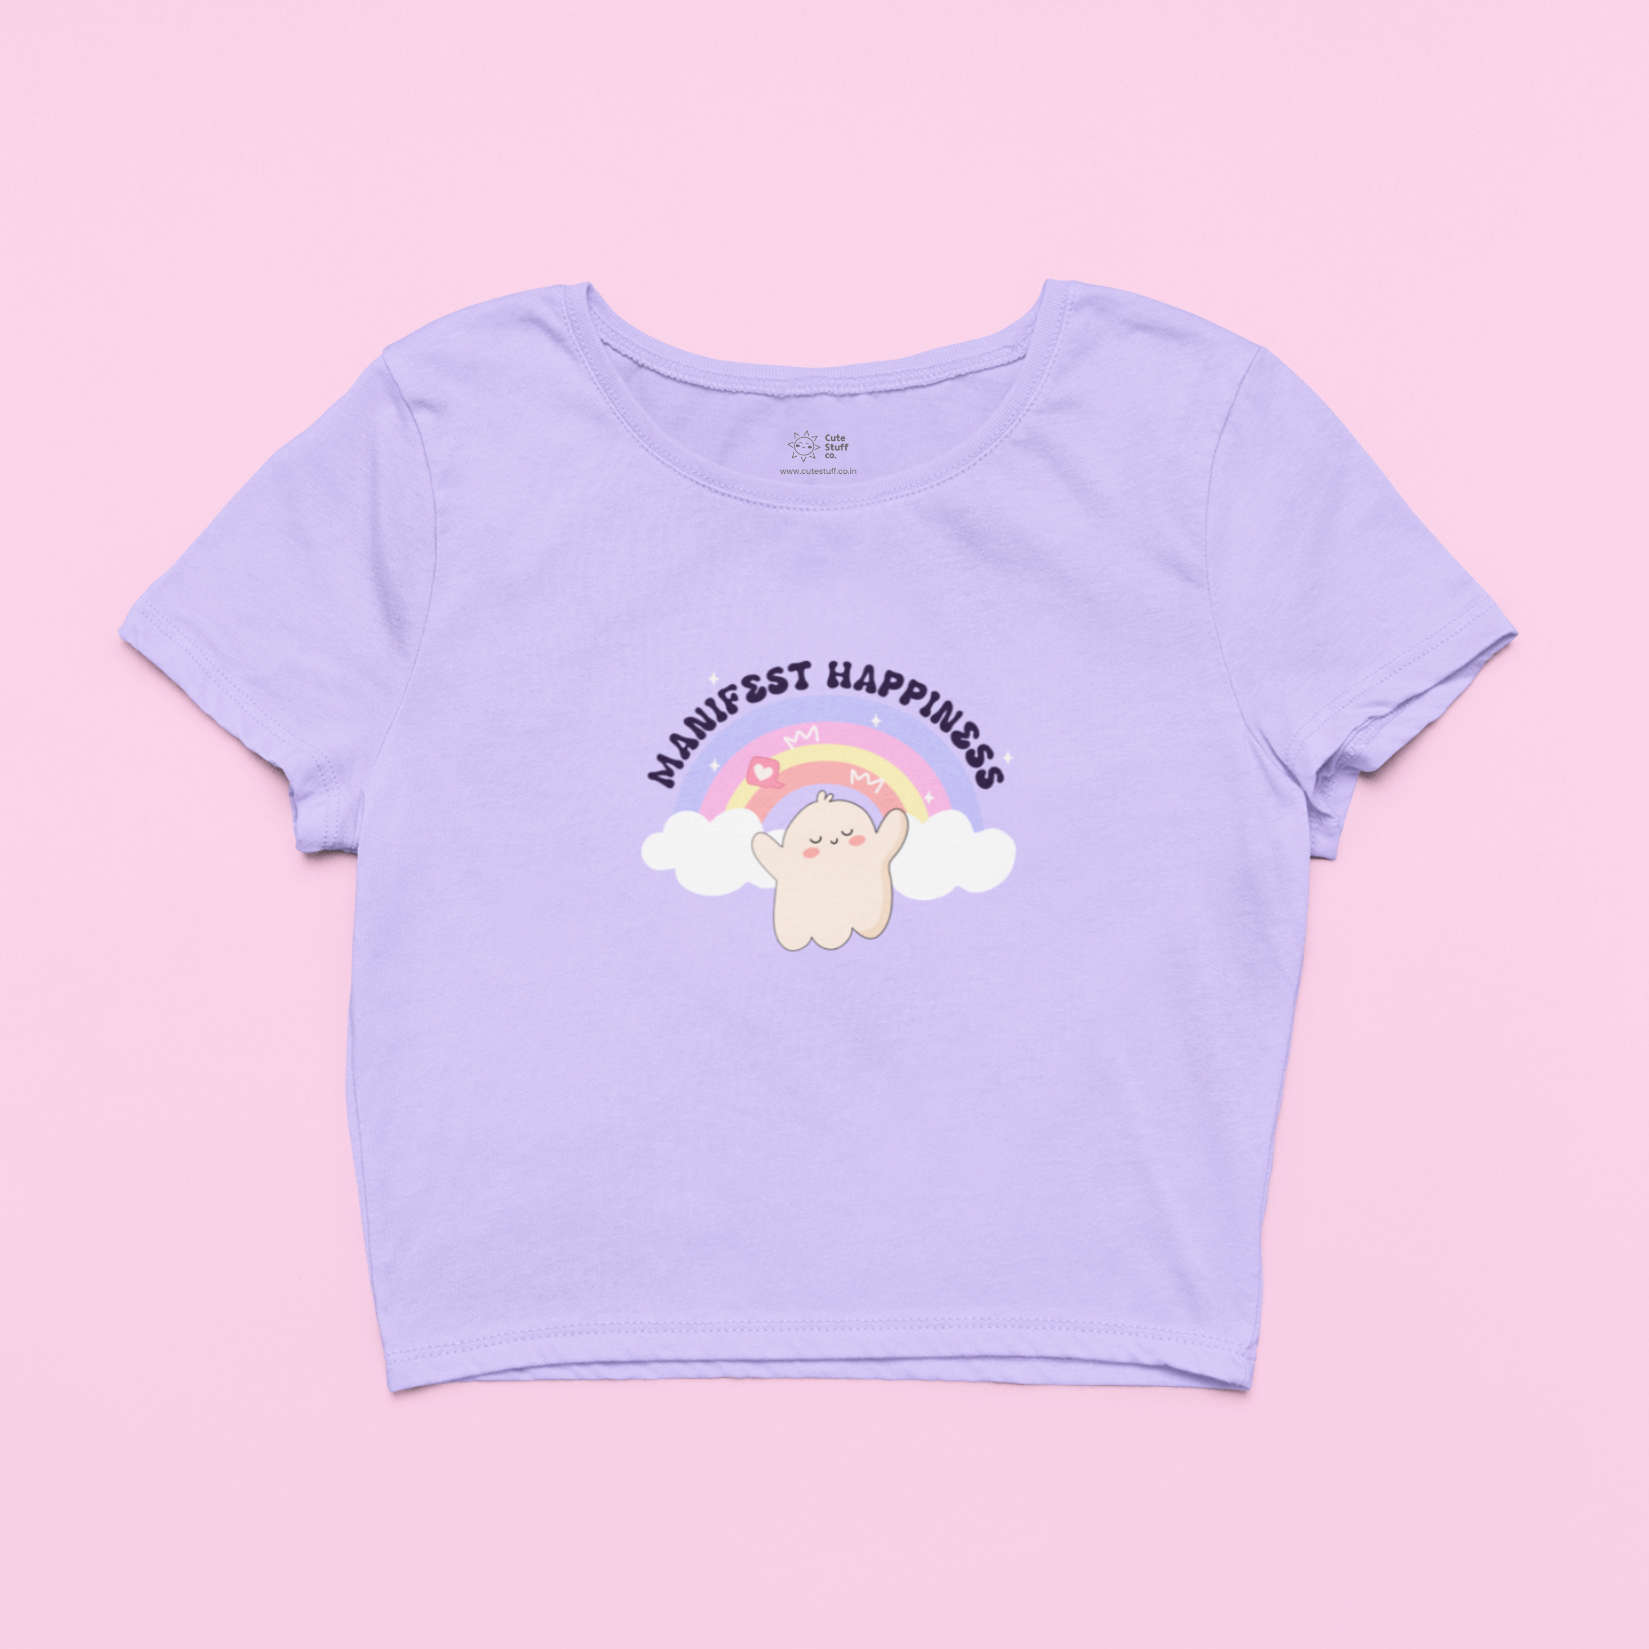 Manifest Happiness Lil Boo Crop Tops By Cute Stuff Co. 180 GSM